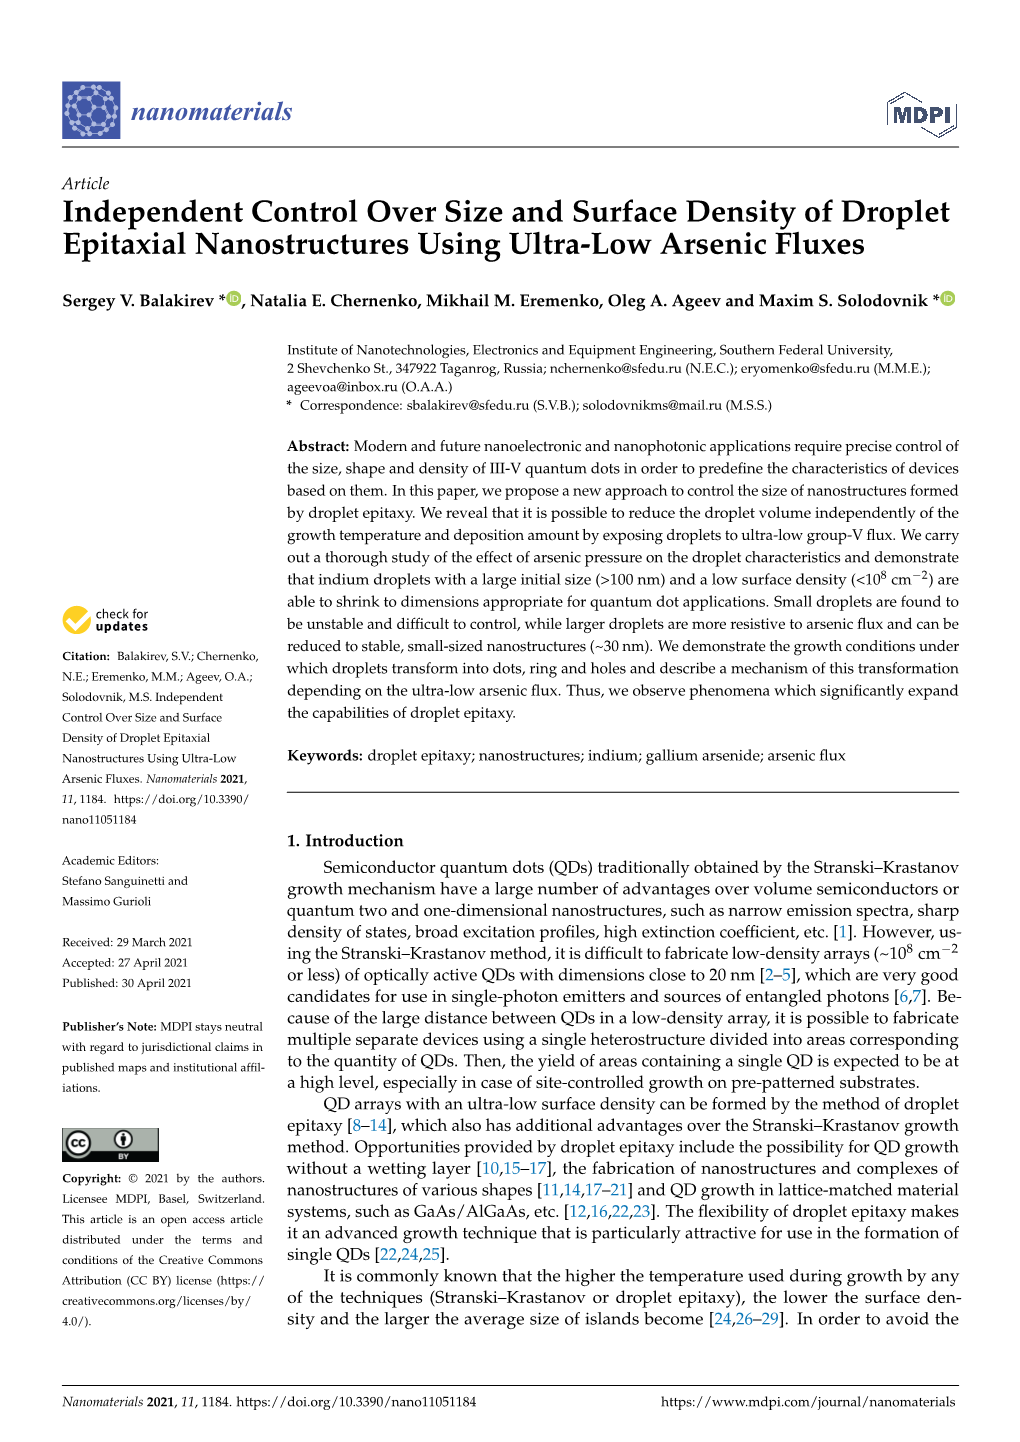 Independent Control Over Size and Surface Density of Droplet Epitaxial Nanostructures Using Ultra-Low Arsenic Fluxes